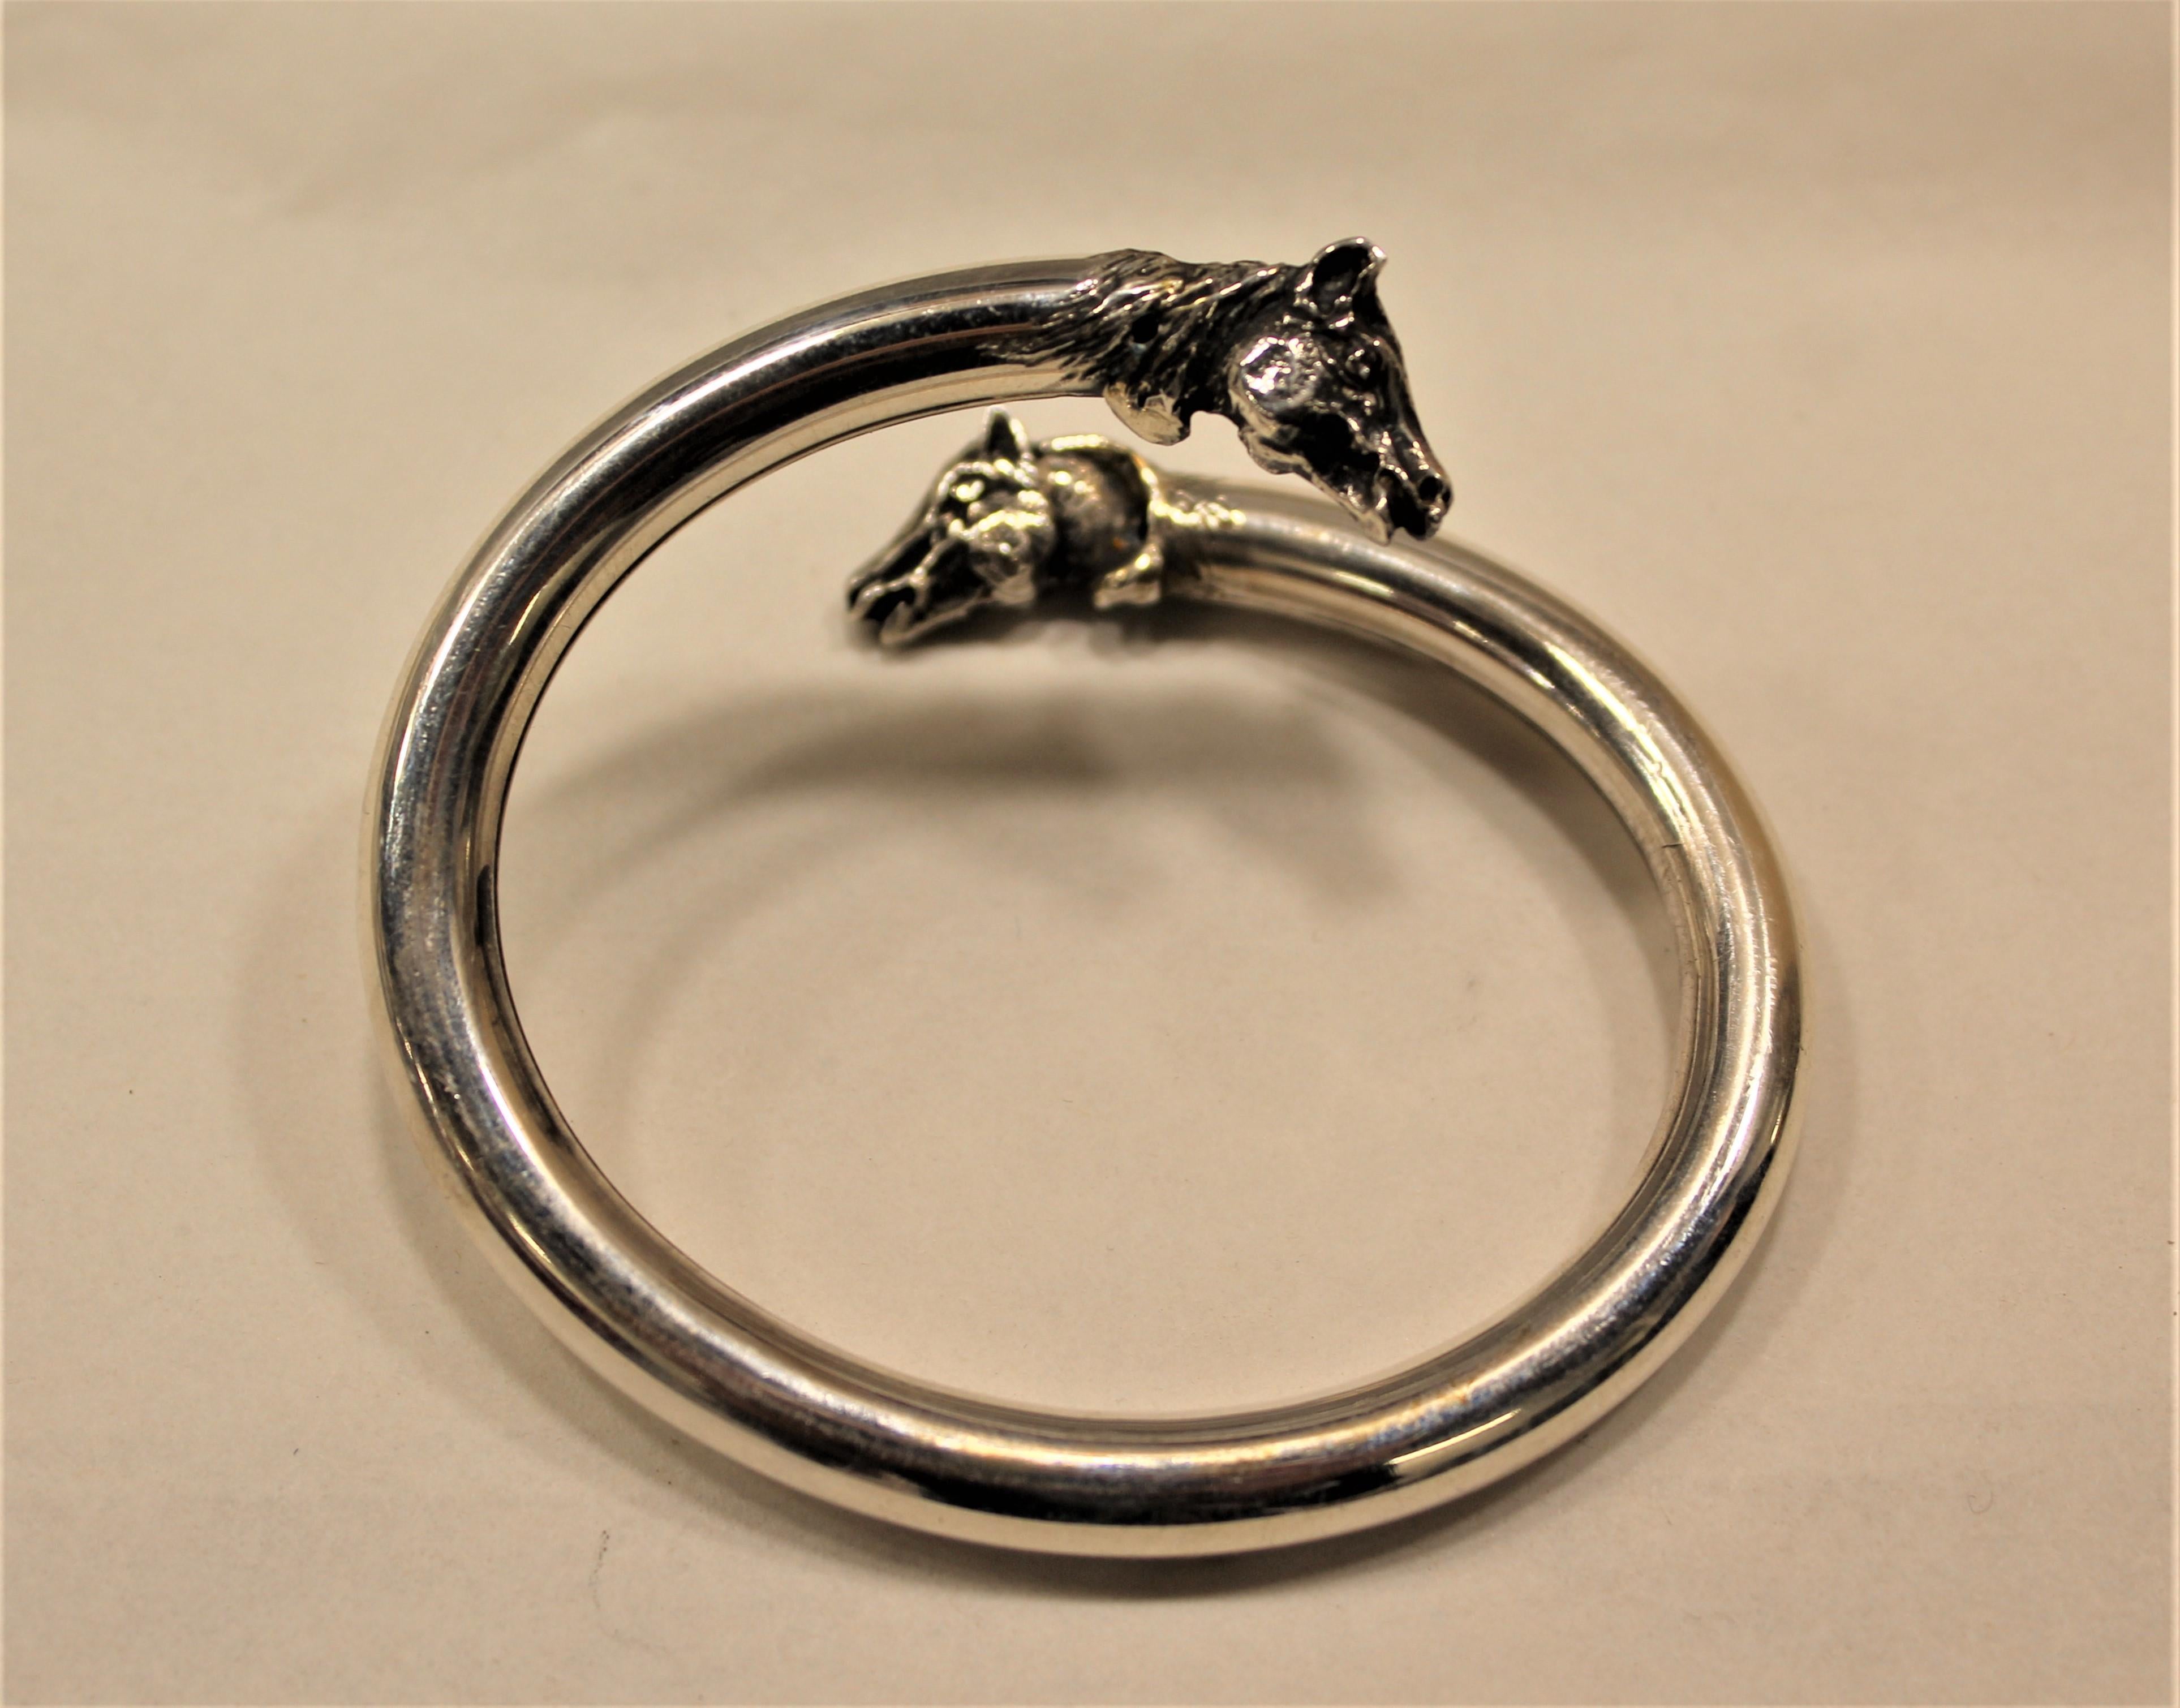 Horse, Cuff Bracelet, Sterling Silver, Handmade, Italy In New Condition For Sale In Firenze, IT